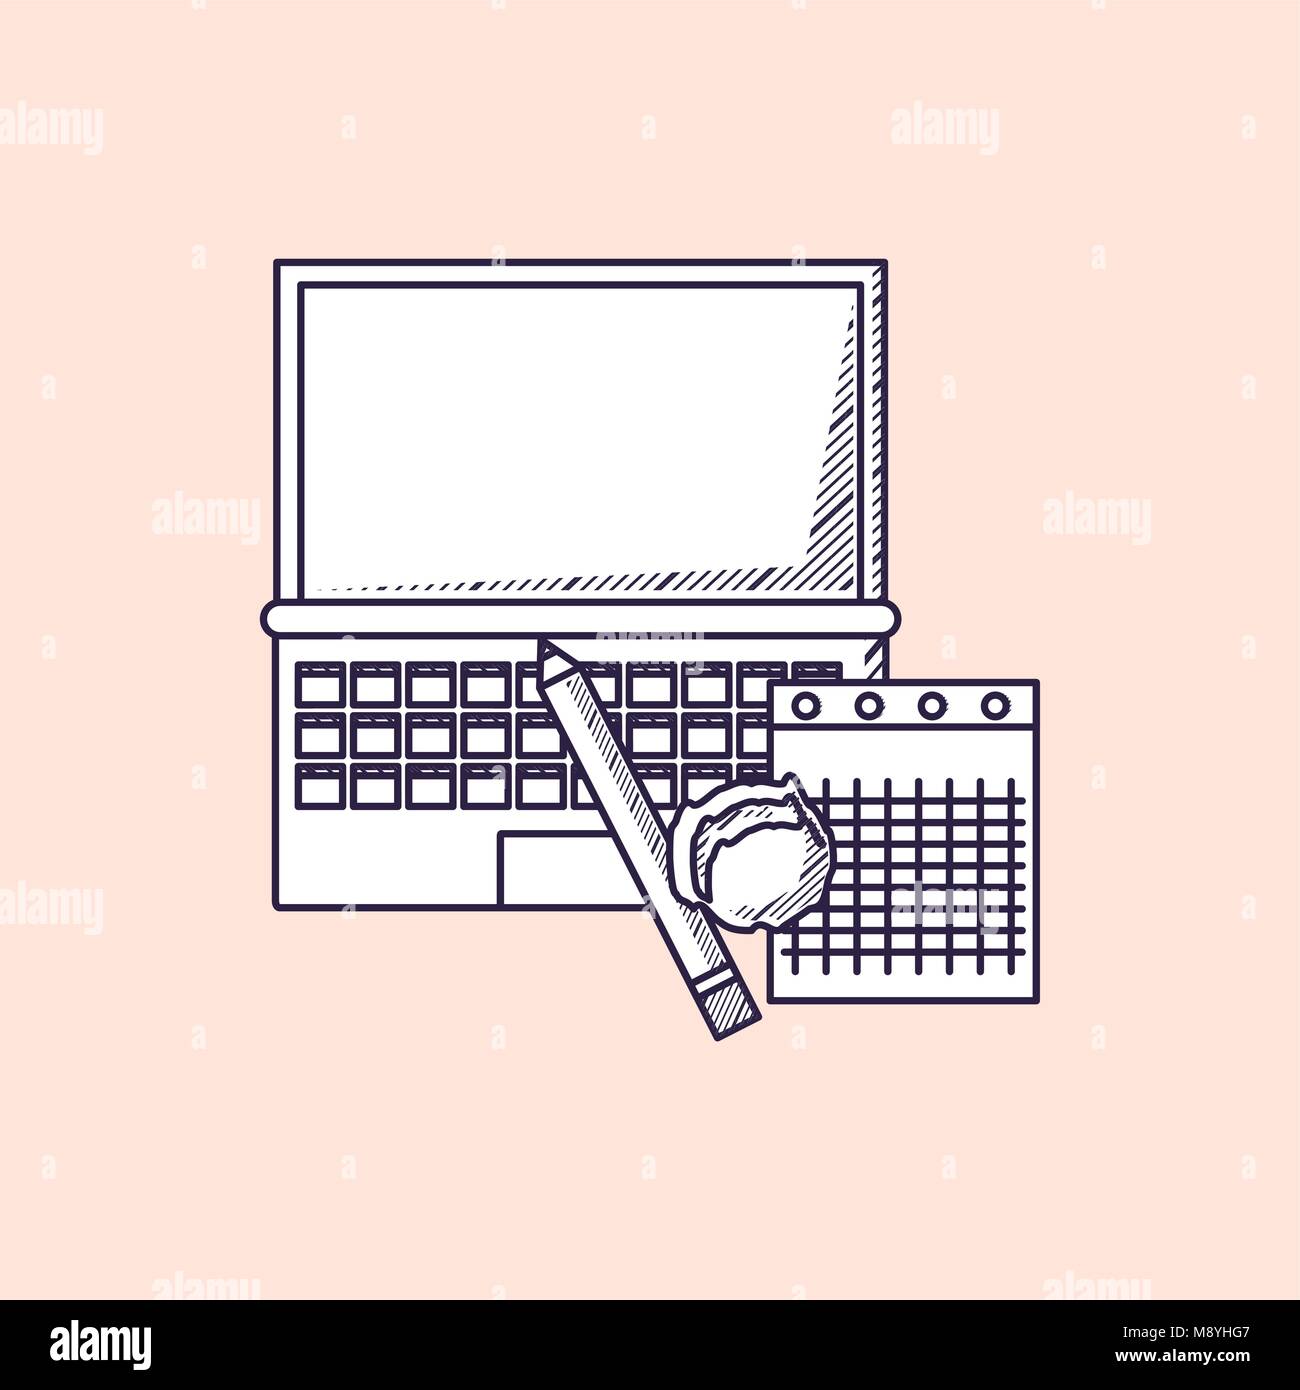 Keyboard drawing vector template illustration design  CanStock